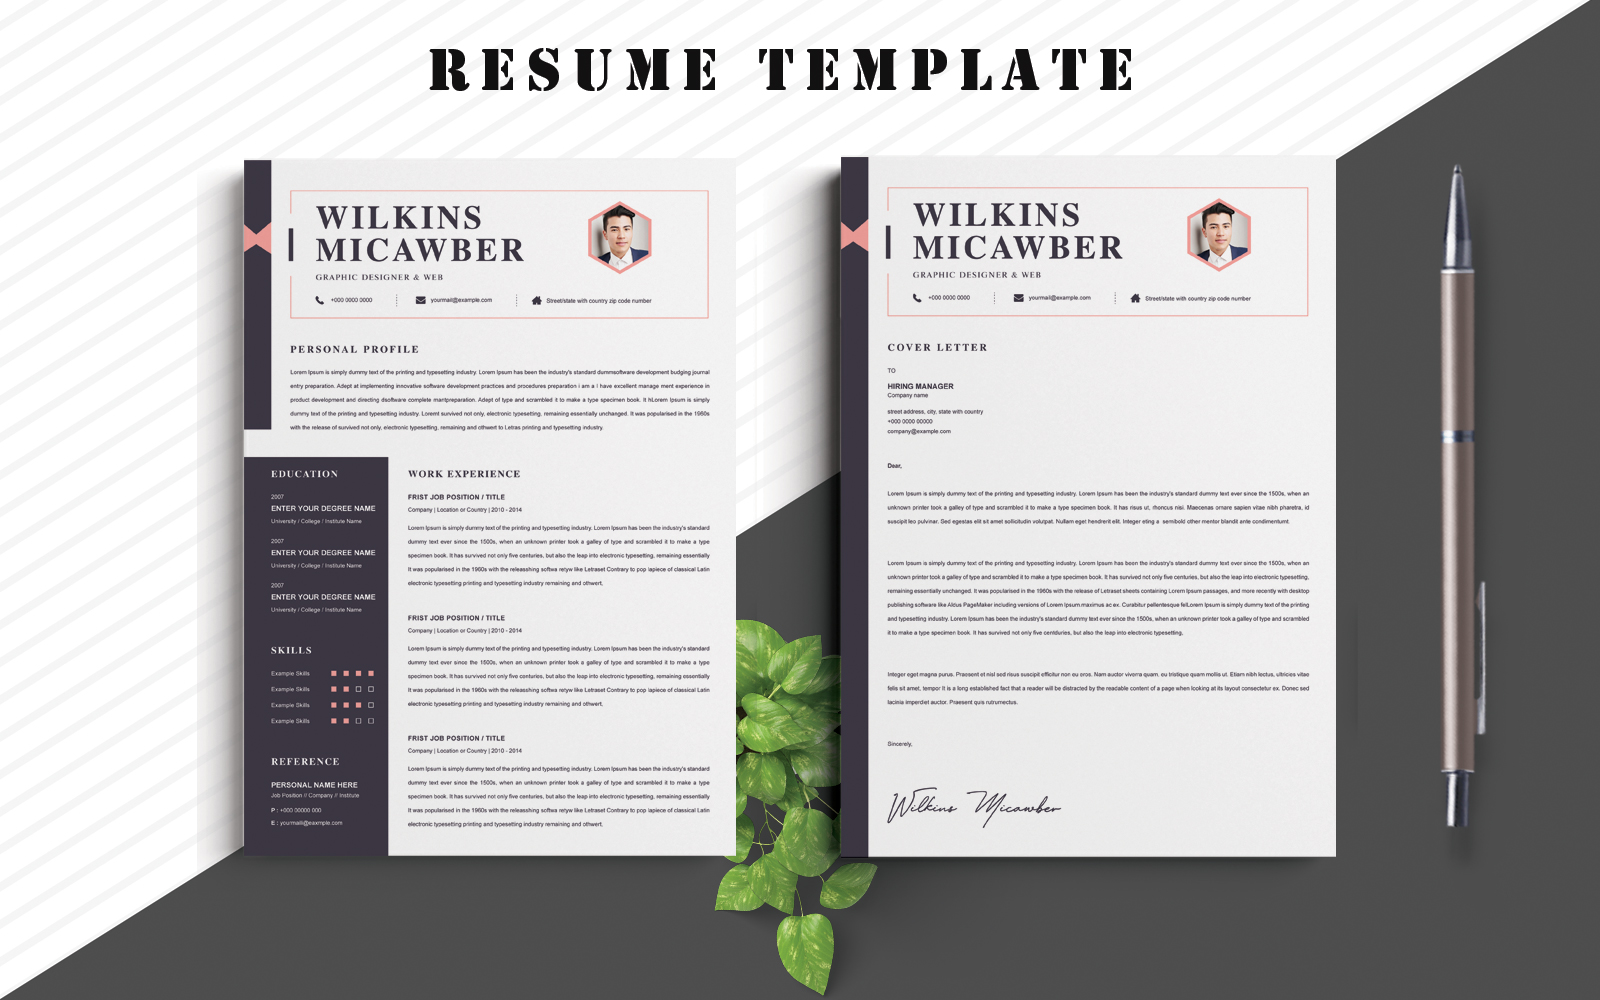 Micawber Resume Template 2023